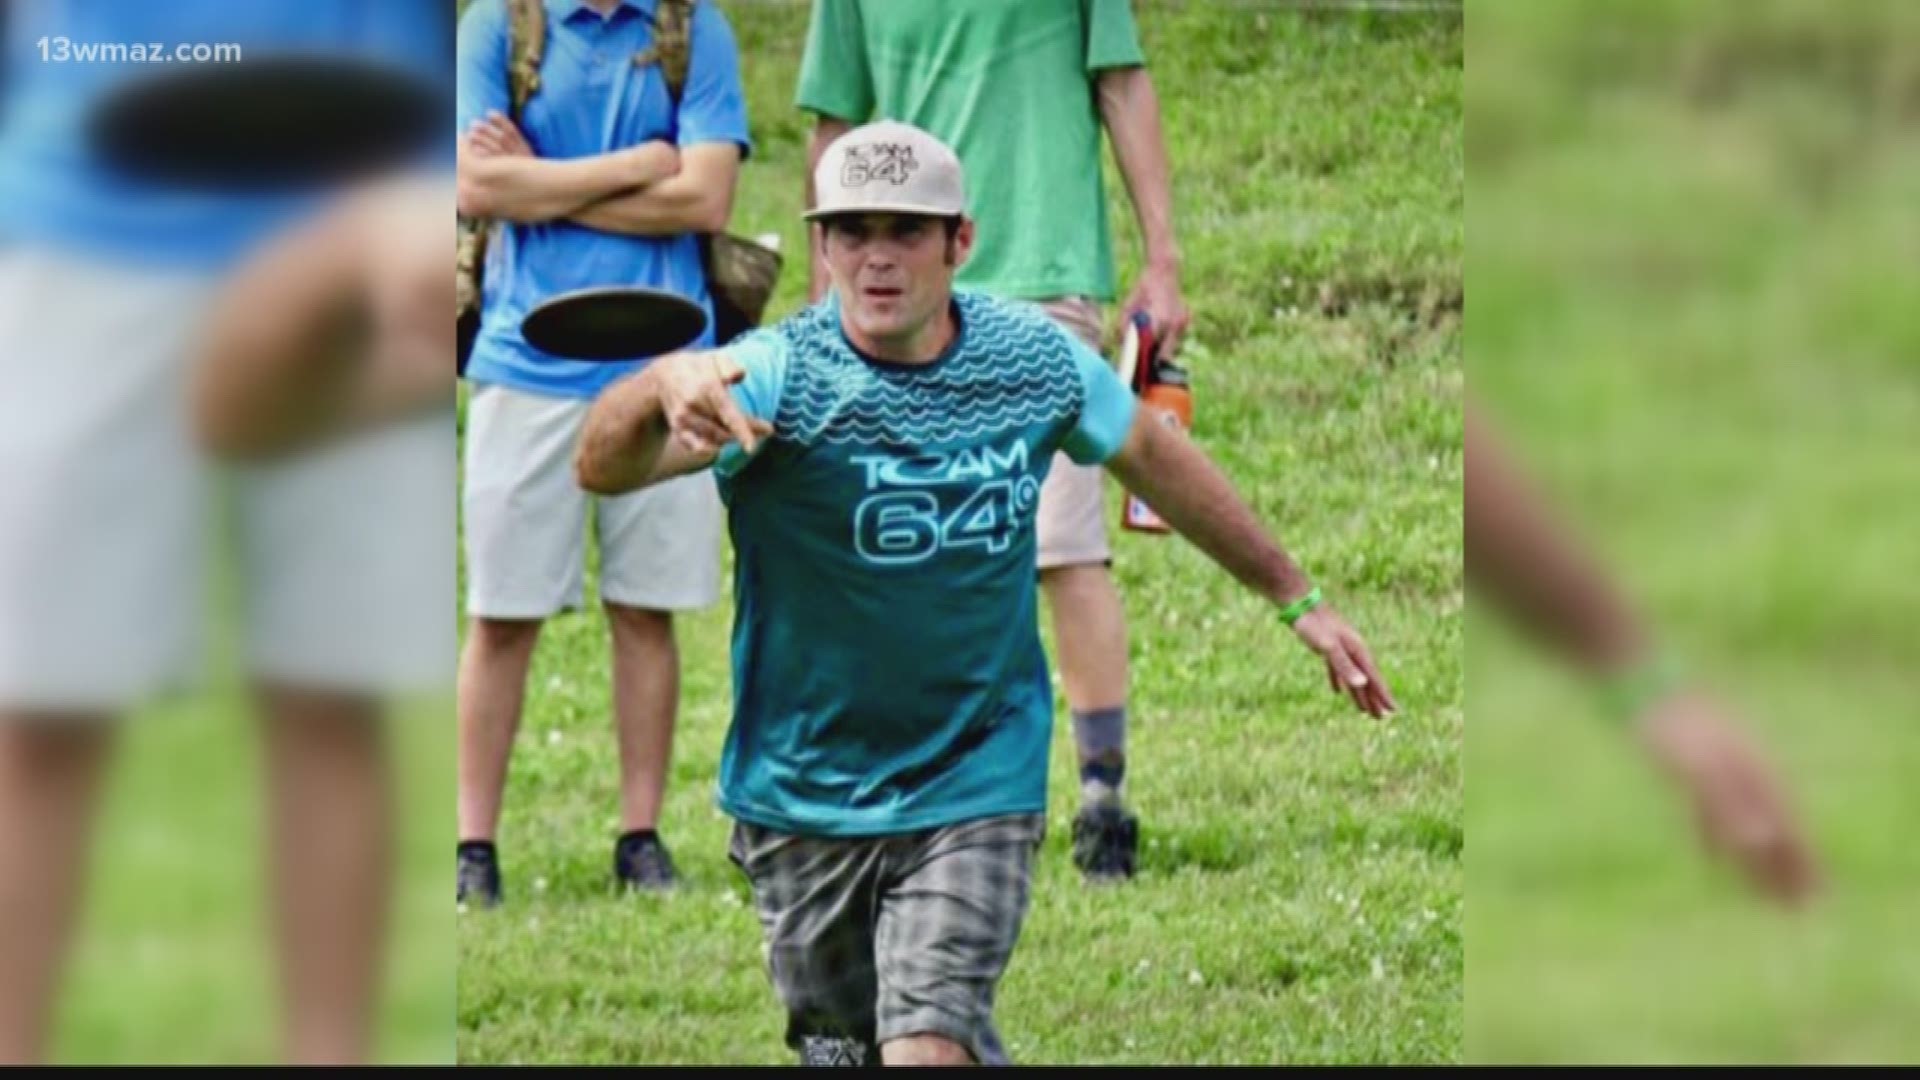 World champion disc golf pro David Feldberg wants to start a amateur tournament in Macon. He says he can make it happen with a little help from the county.